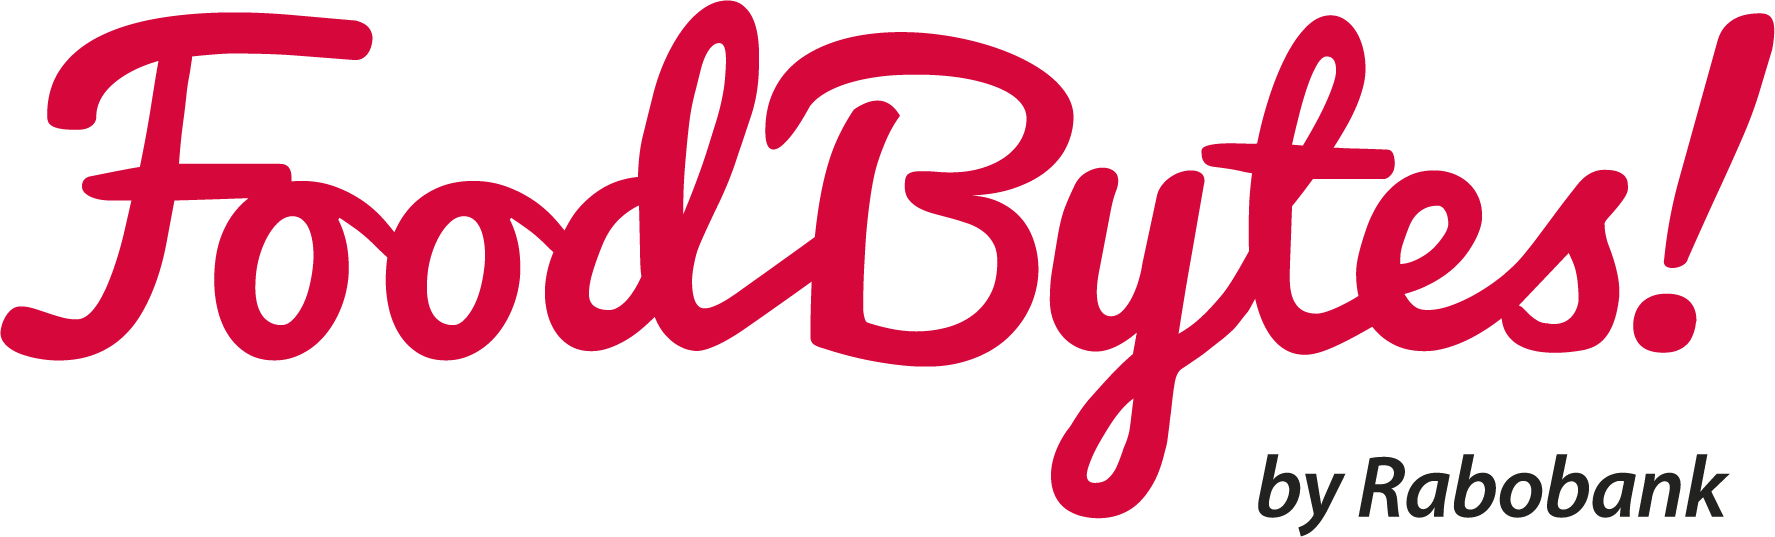 2. FoodBytes! by Rabobank Red.png